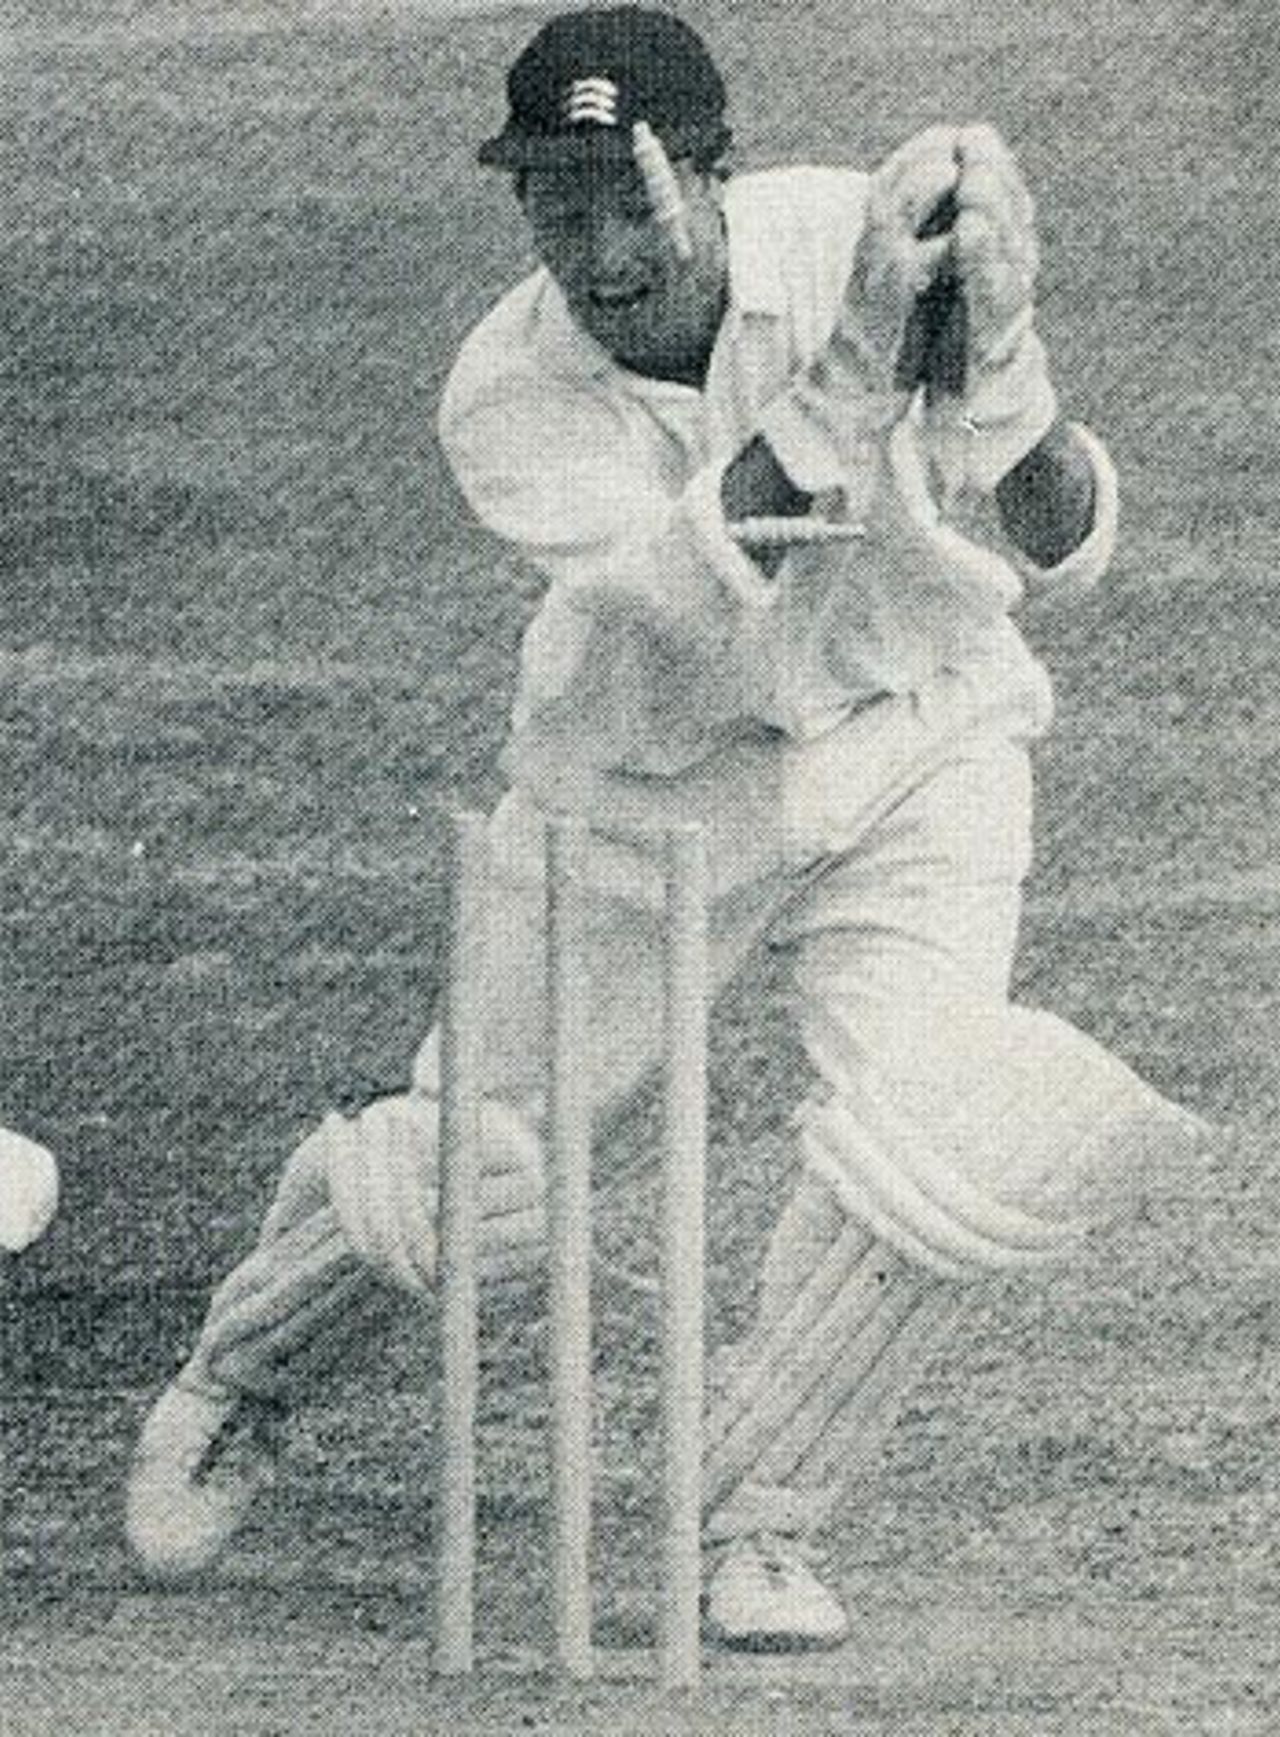 Mike Sturt pulls off a neat stumping in 1976